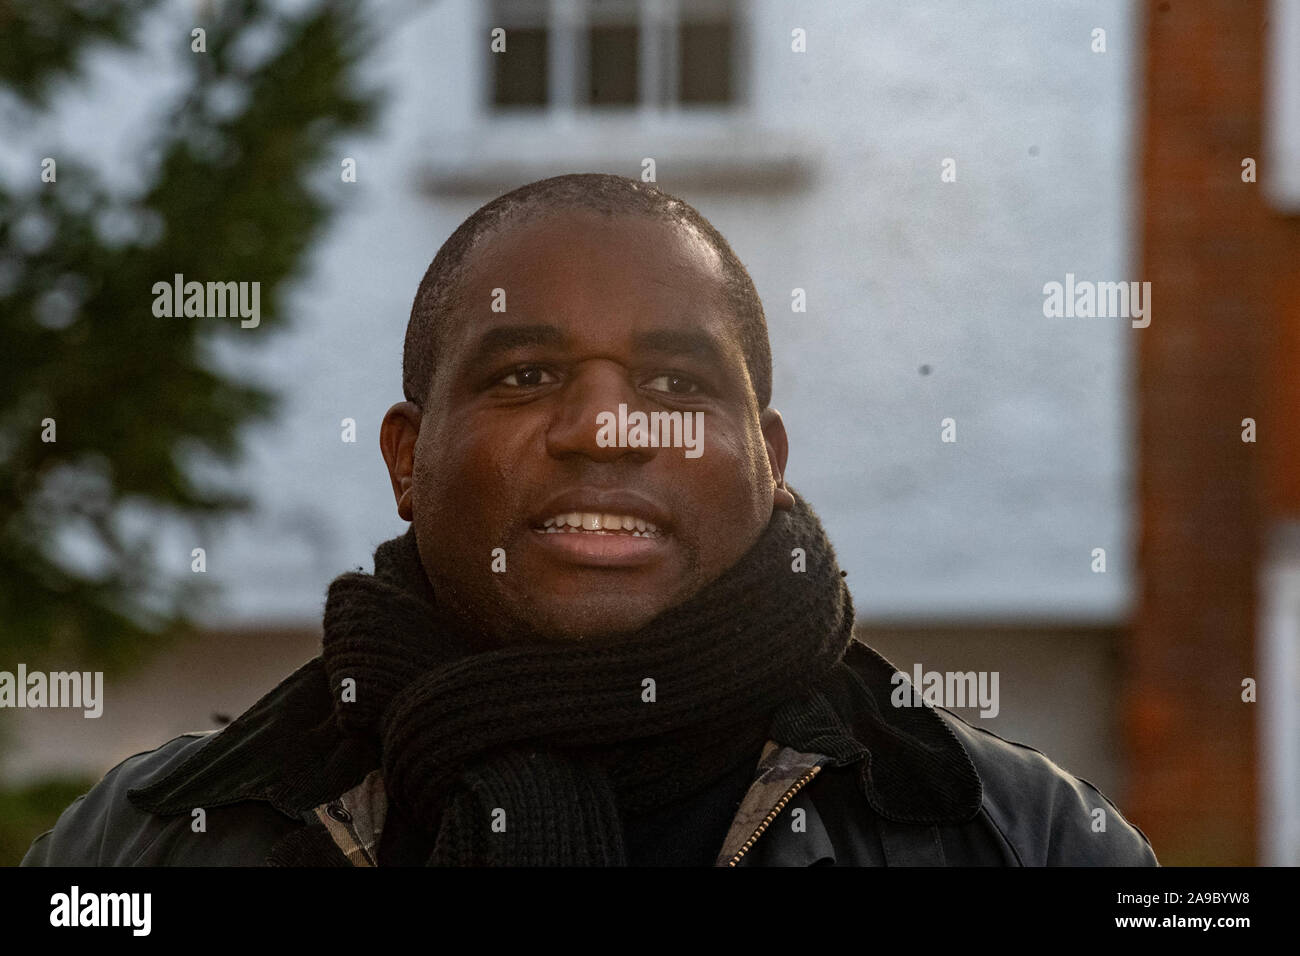 Brentwood Essex, UK. 14th Nov, 2019. General Election David Lammy, (pictured) labour candidate for Tottenham and controversal politician campaigning in Brentwood Essex with Oliver Durose, Labour parliamentary candidate for Brentwood and Ongar in Brentwood High Street, Essex UK Credit: Ian Davidson/Alamy Live News Stock Photo